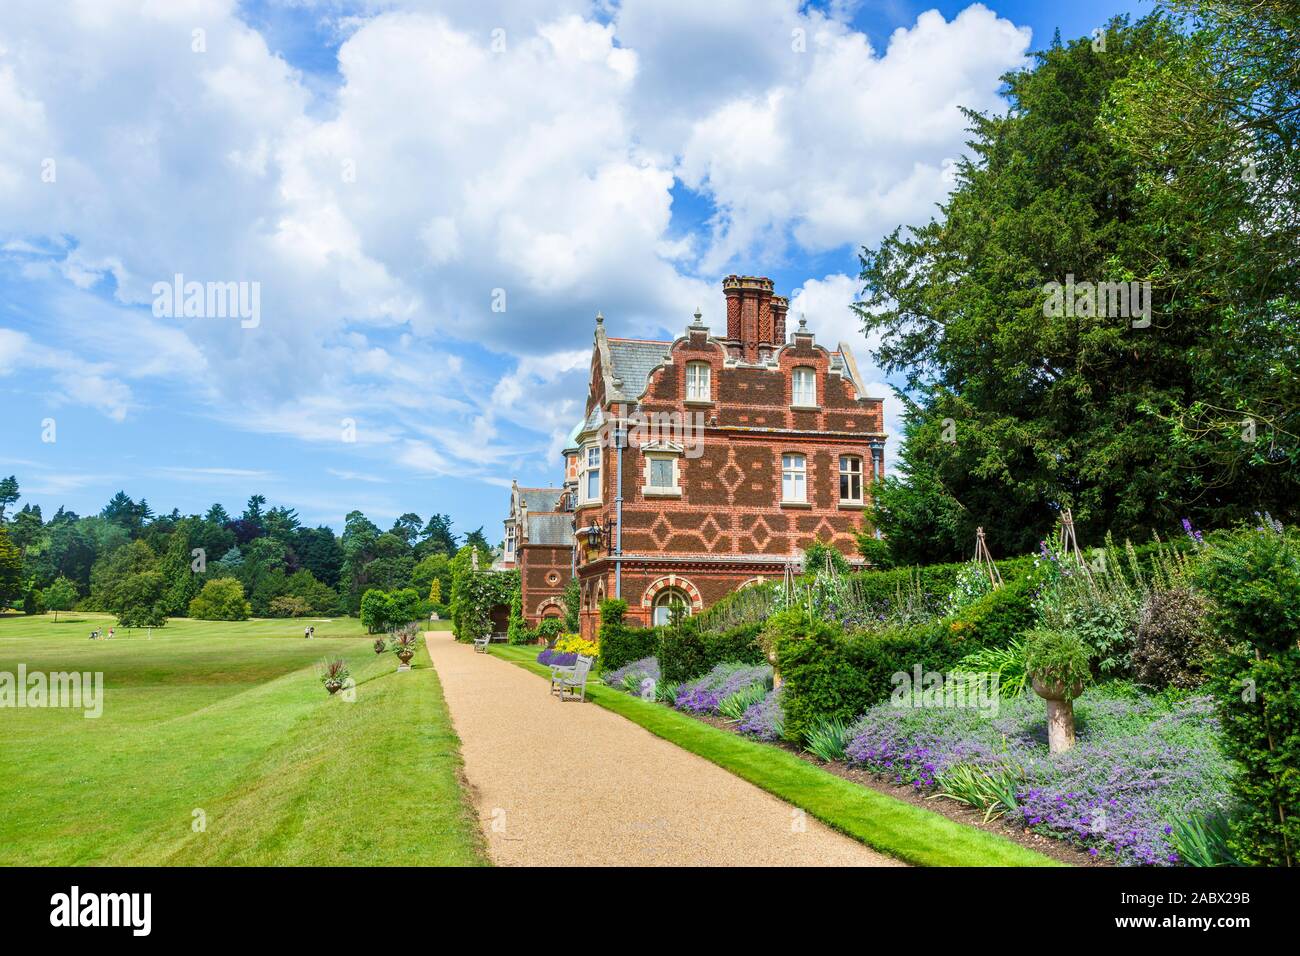 View of the rear facade of Sandringham House, the Queen's Jacobethan style Norfolk country house retreat, with fine brickwork and flower borders Stock Photo